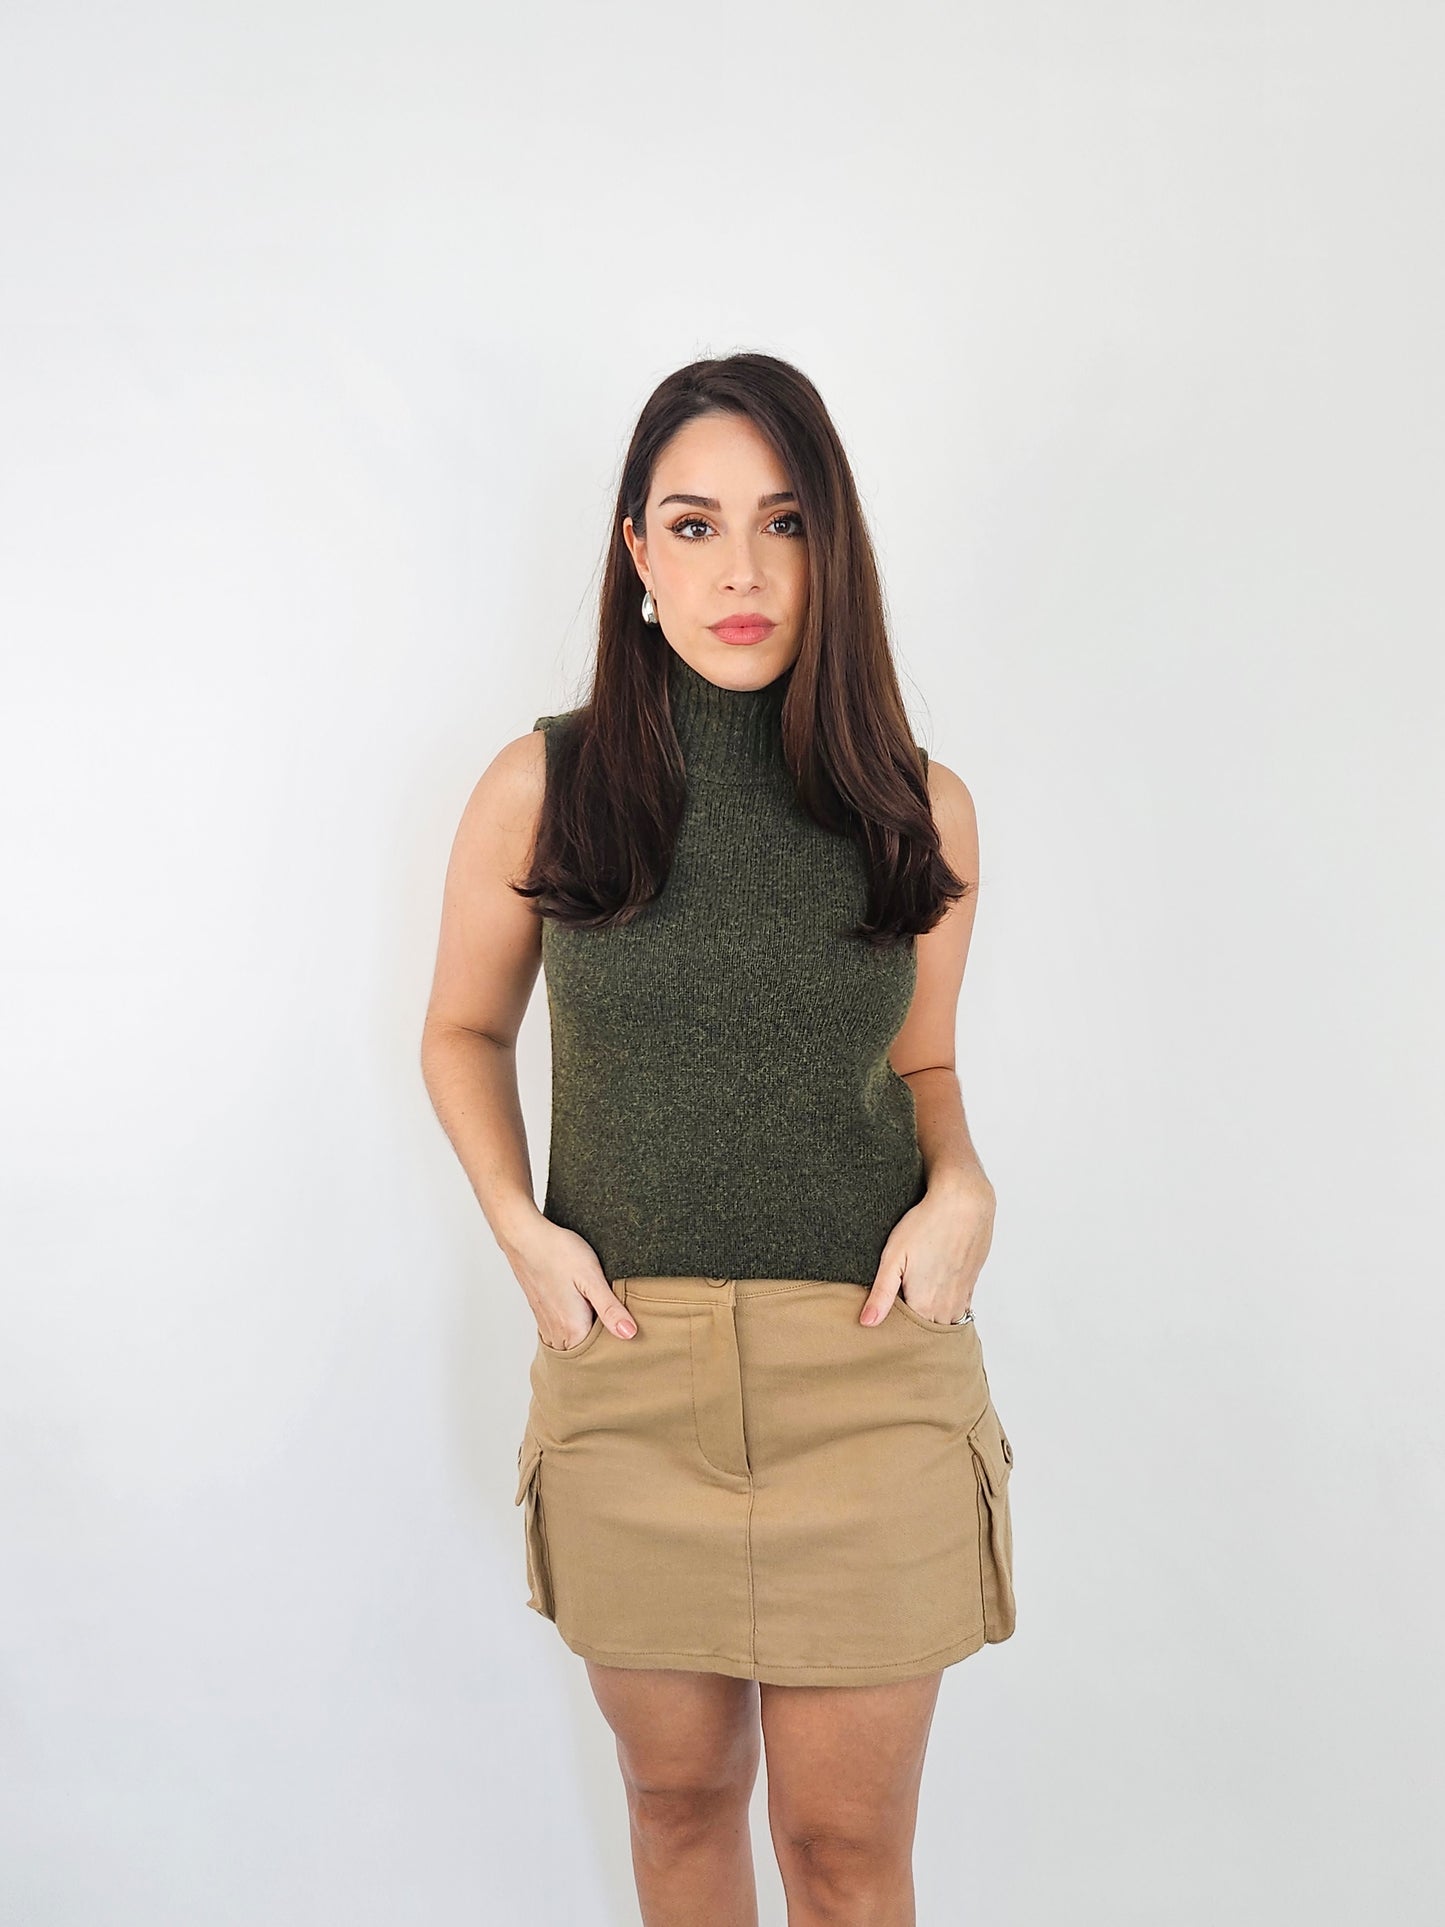 Mini Khaki cargo skirt. Showing the pockets as it has two front pockets and two side pockets. 